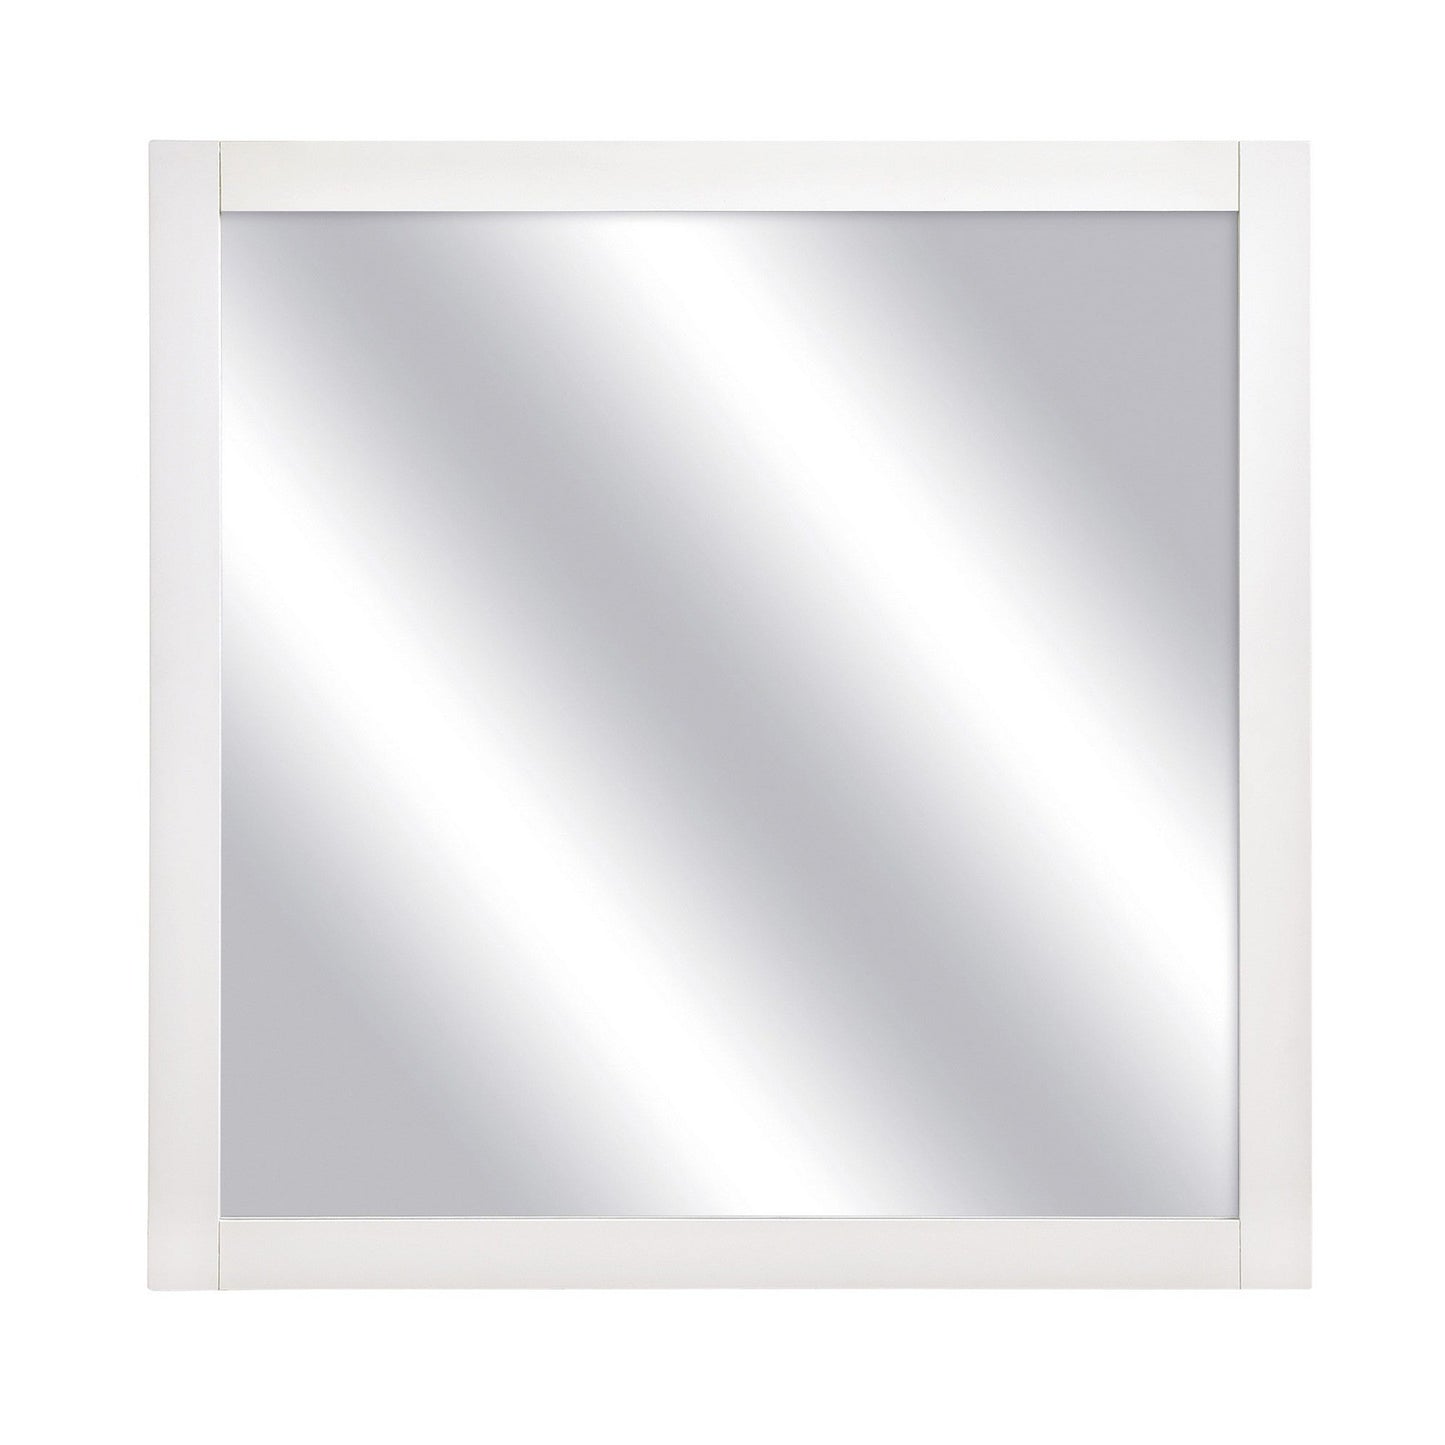 Benzara White and Silver Square Shape Wooden Frame Mirror With Mounting Hardware